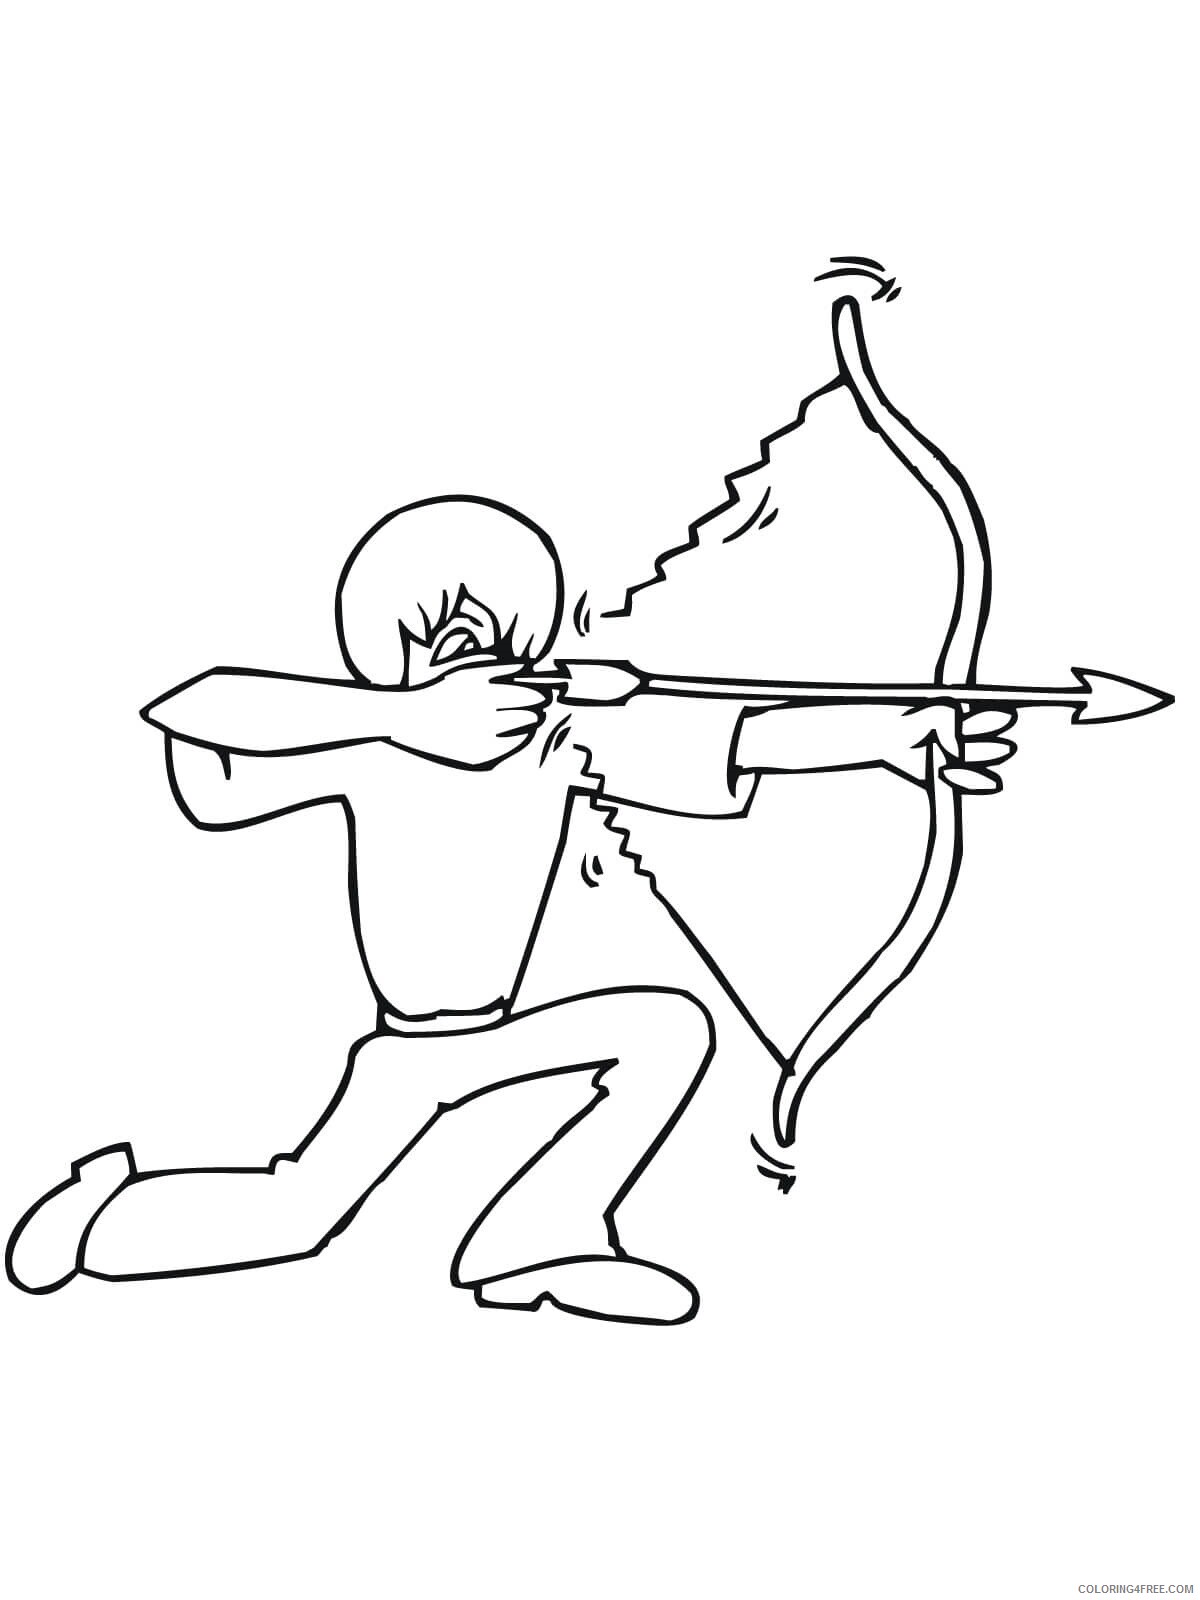 Bow Coloring Pages 1555918630_bow shooting from the knee Printable 2021 1070 Coloring4free